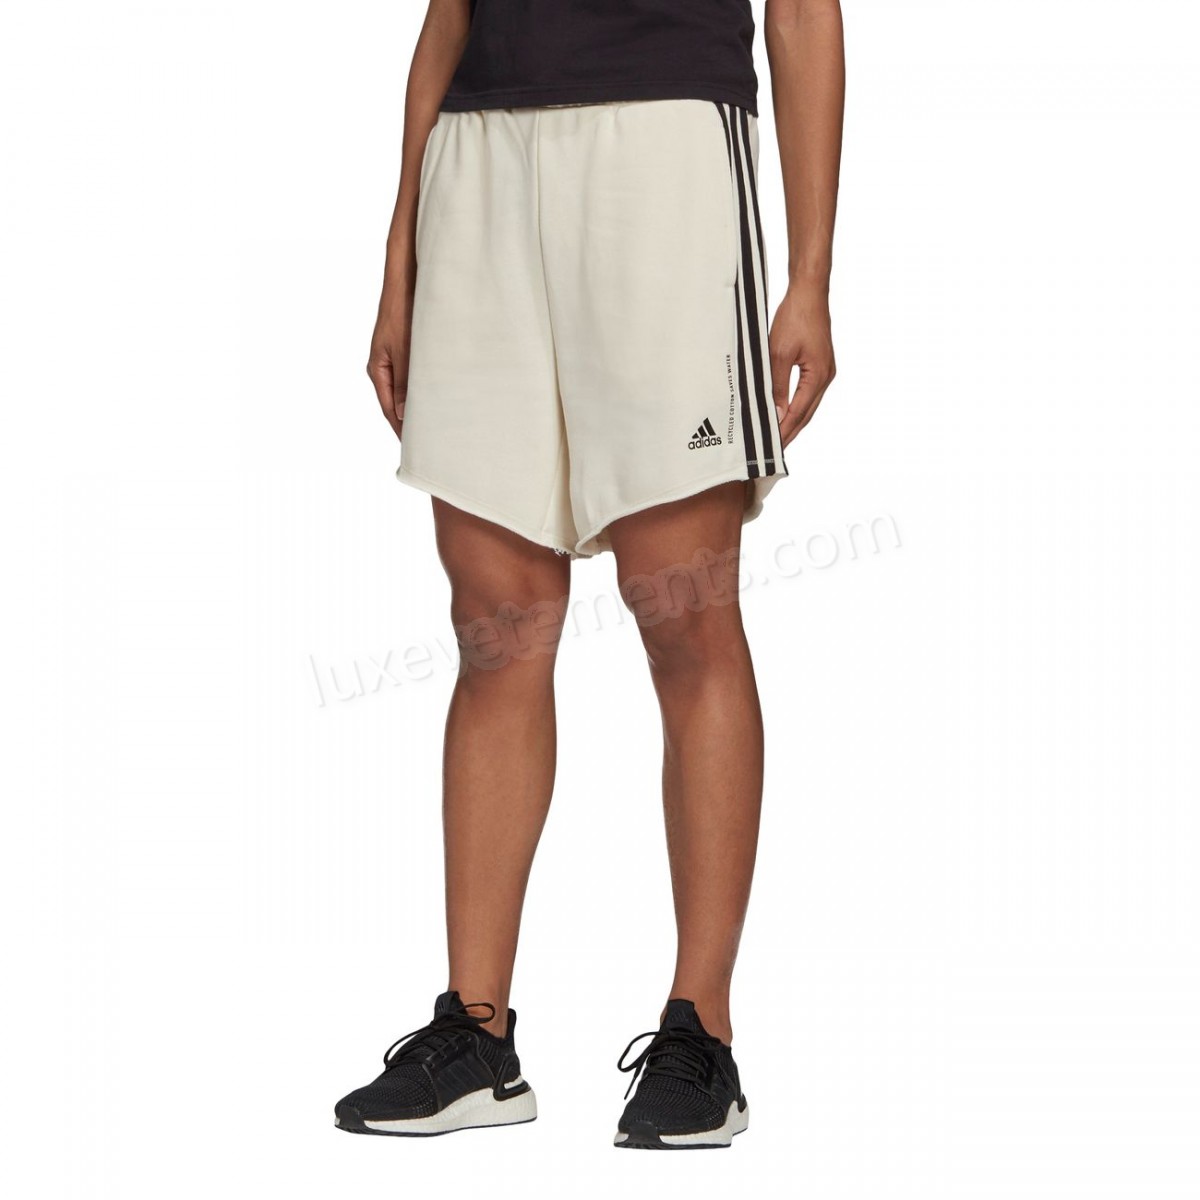 Adidas-Fitness femme ADIDAS Short femme adidas Must Haves Recycled Cotton Vente en ligne - -5